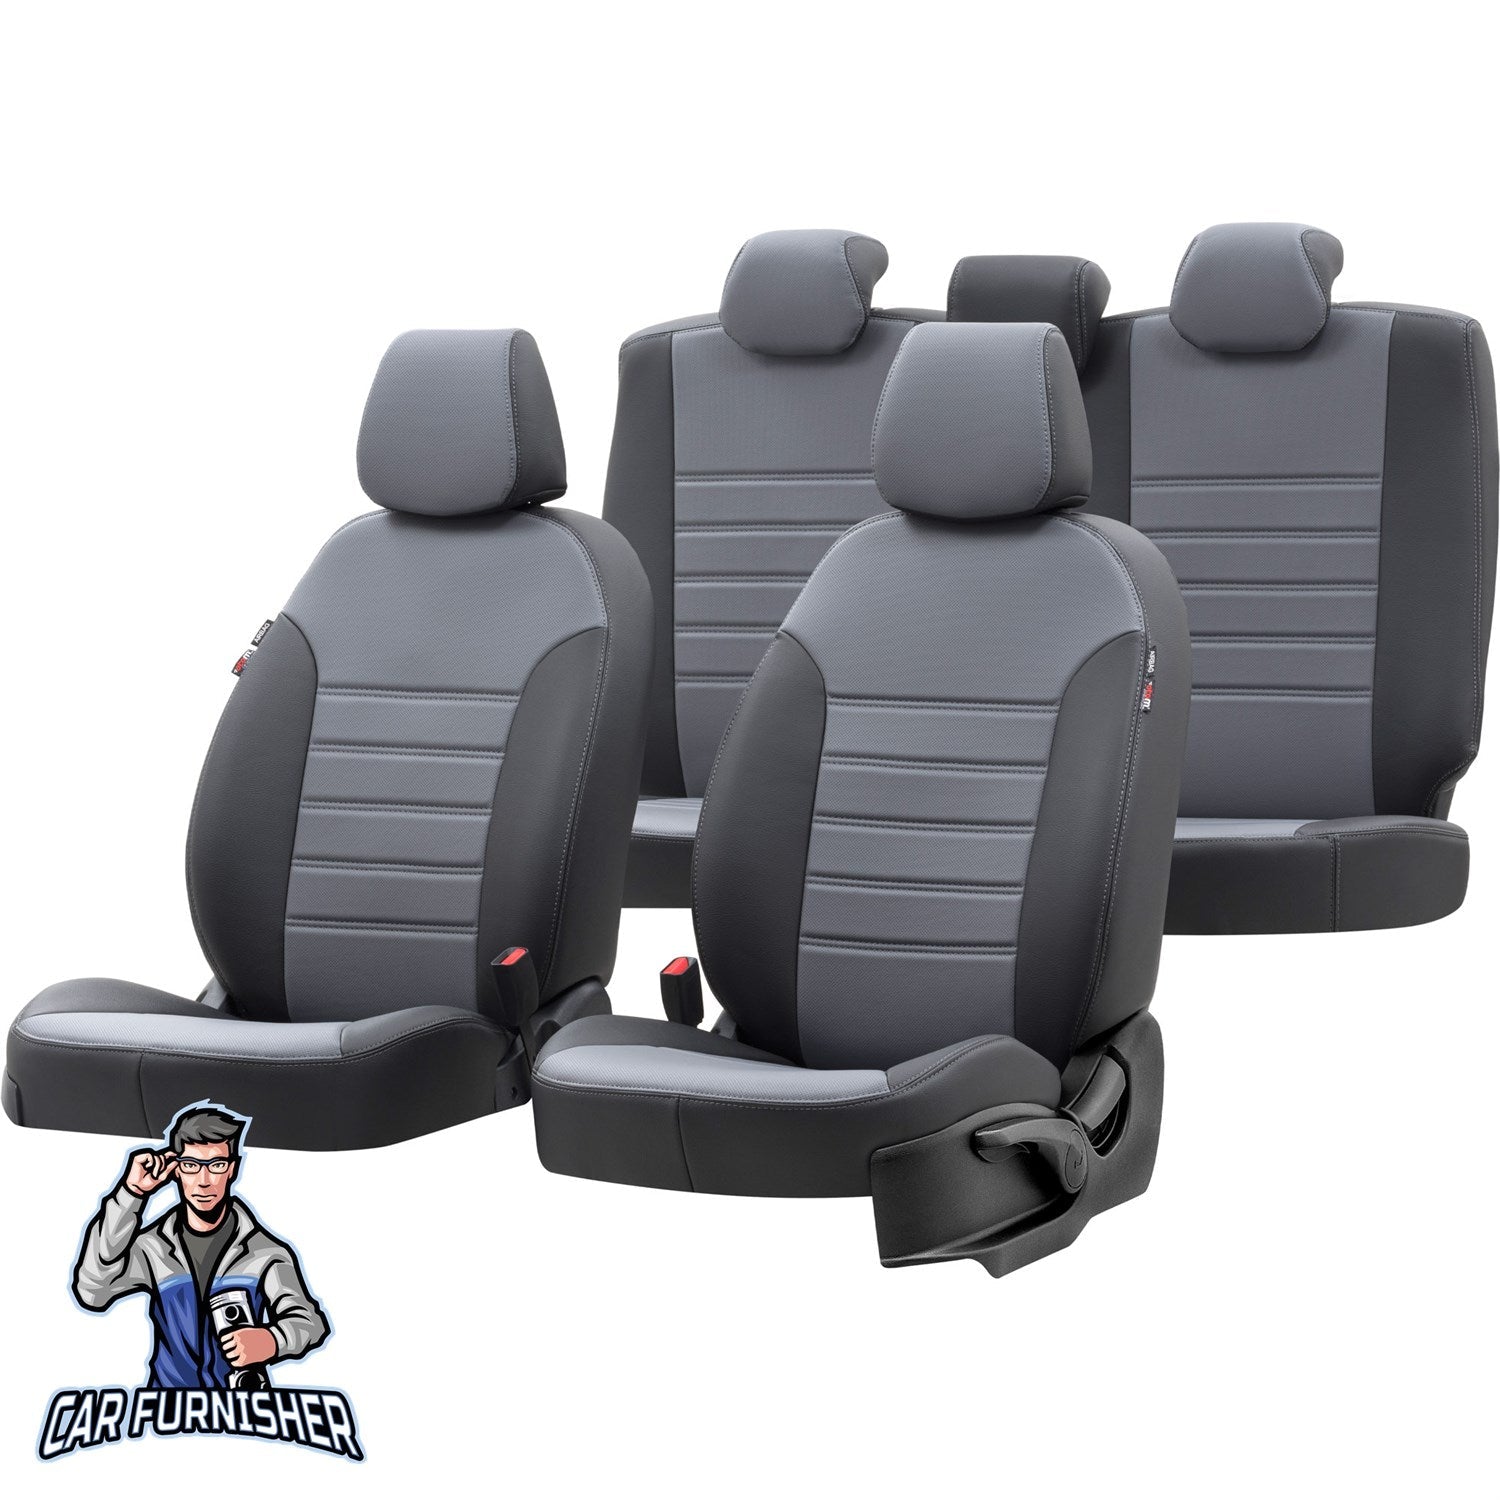 Volvo XC70 Seat Cover Istanbul Leather Design Smoked Black Leather